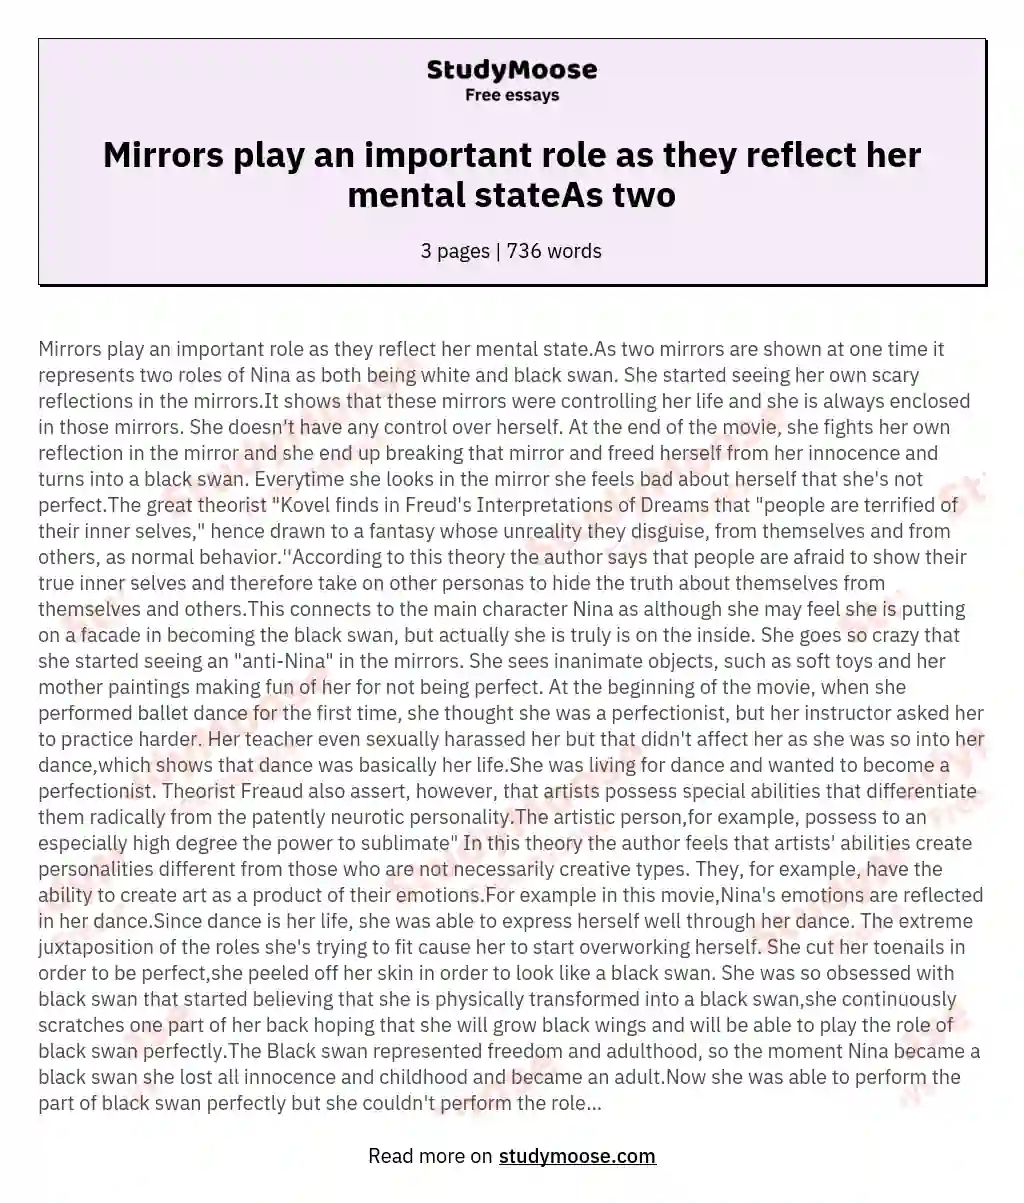 Mirrors play an important role as they reflect her mental stateAs two essay